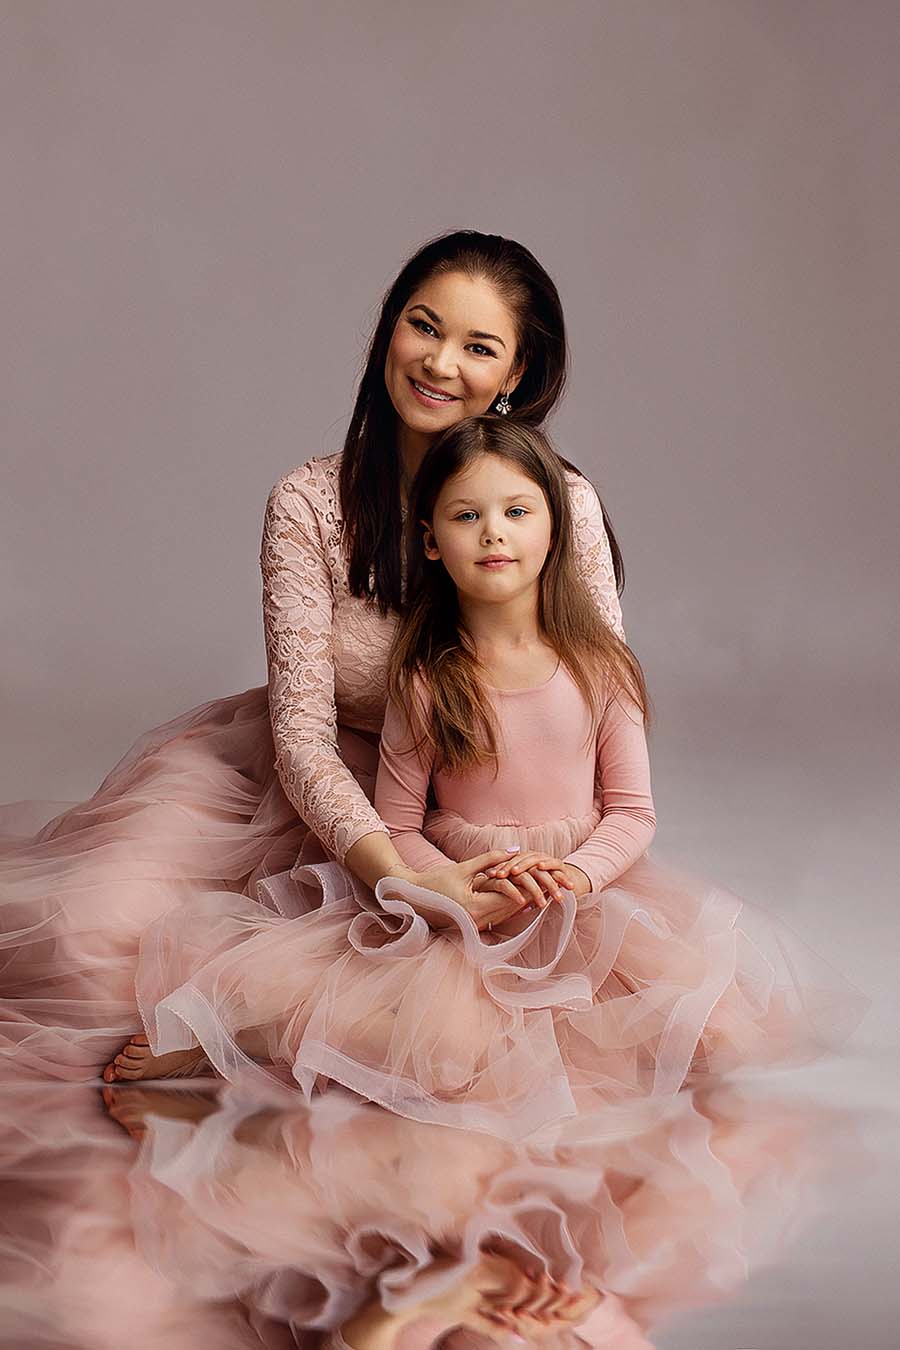 mom and daughter are posing together sitting on the floor during a photo shoot in a studio. they are wearing matching long sleeves dresses in dusty pink color. mom has a lace top and kid has a jersey top. they both have tulle skirt. 